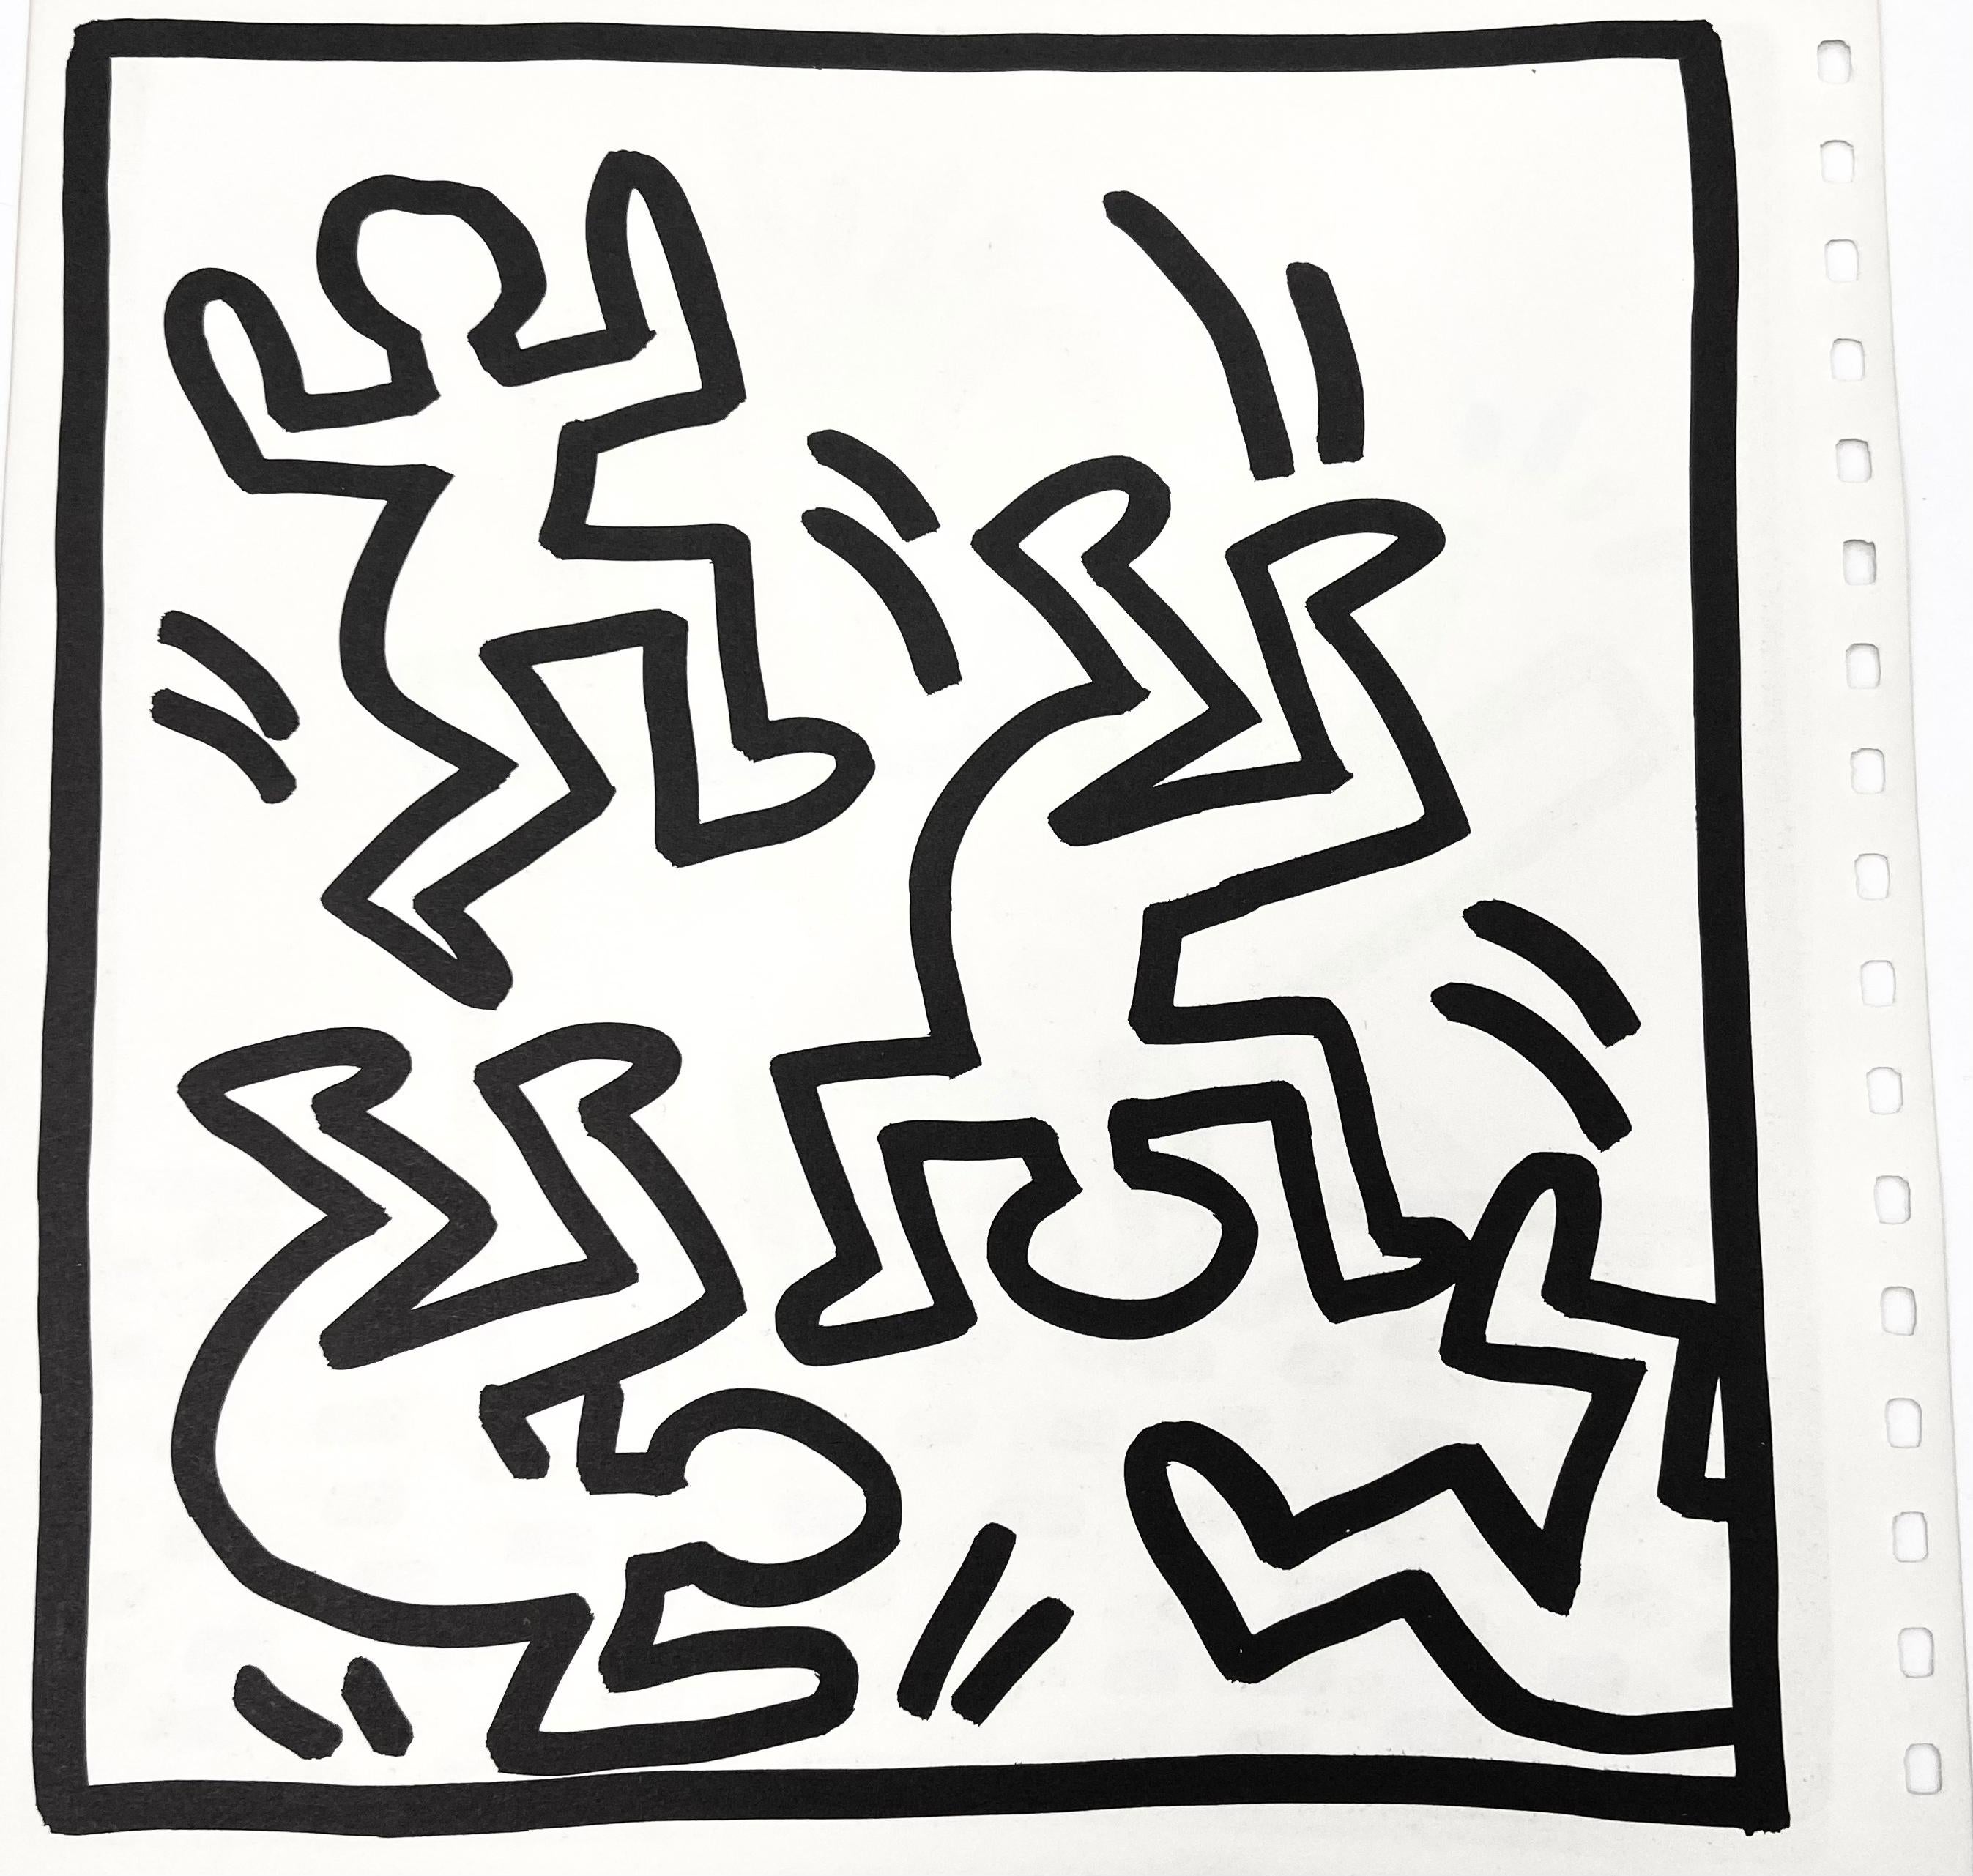 Keith Haring (untitled) dancing figures lithograph 1982 (Keith Haring prints) - Print by (after) Keith Haring